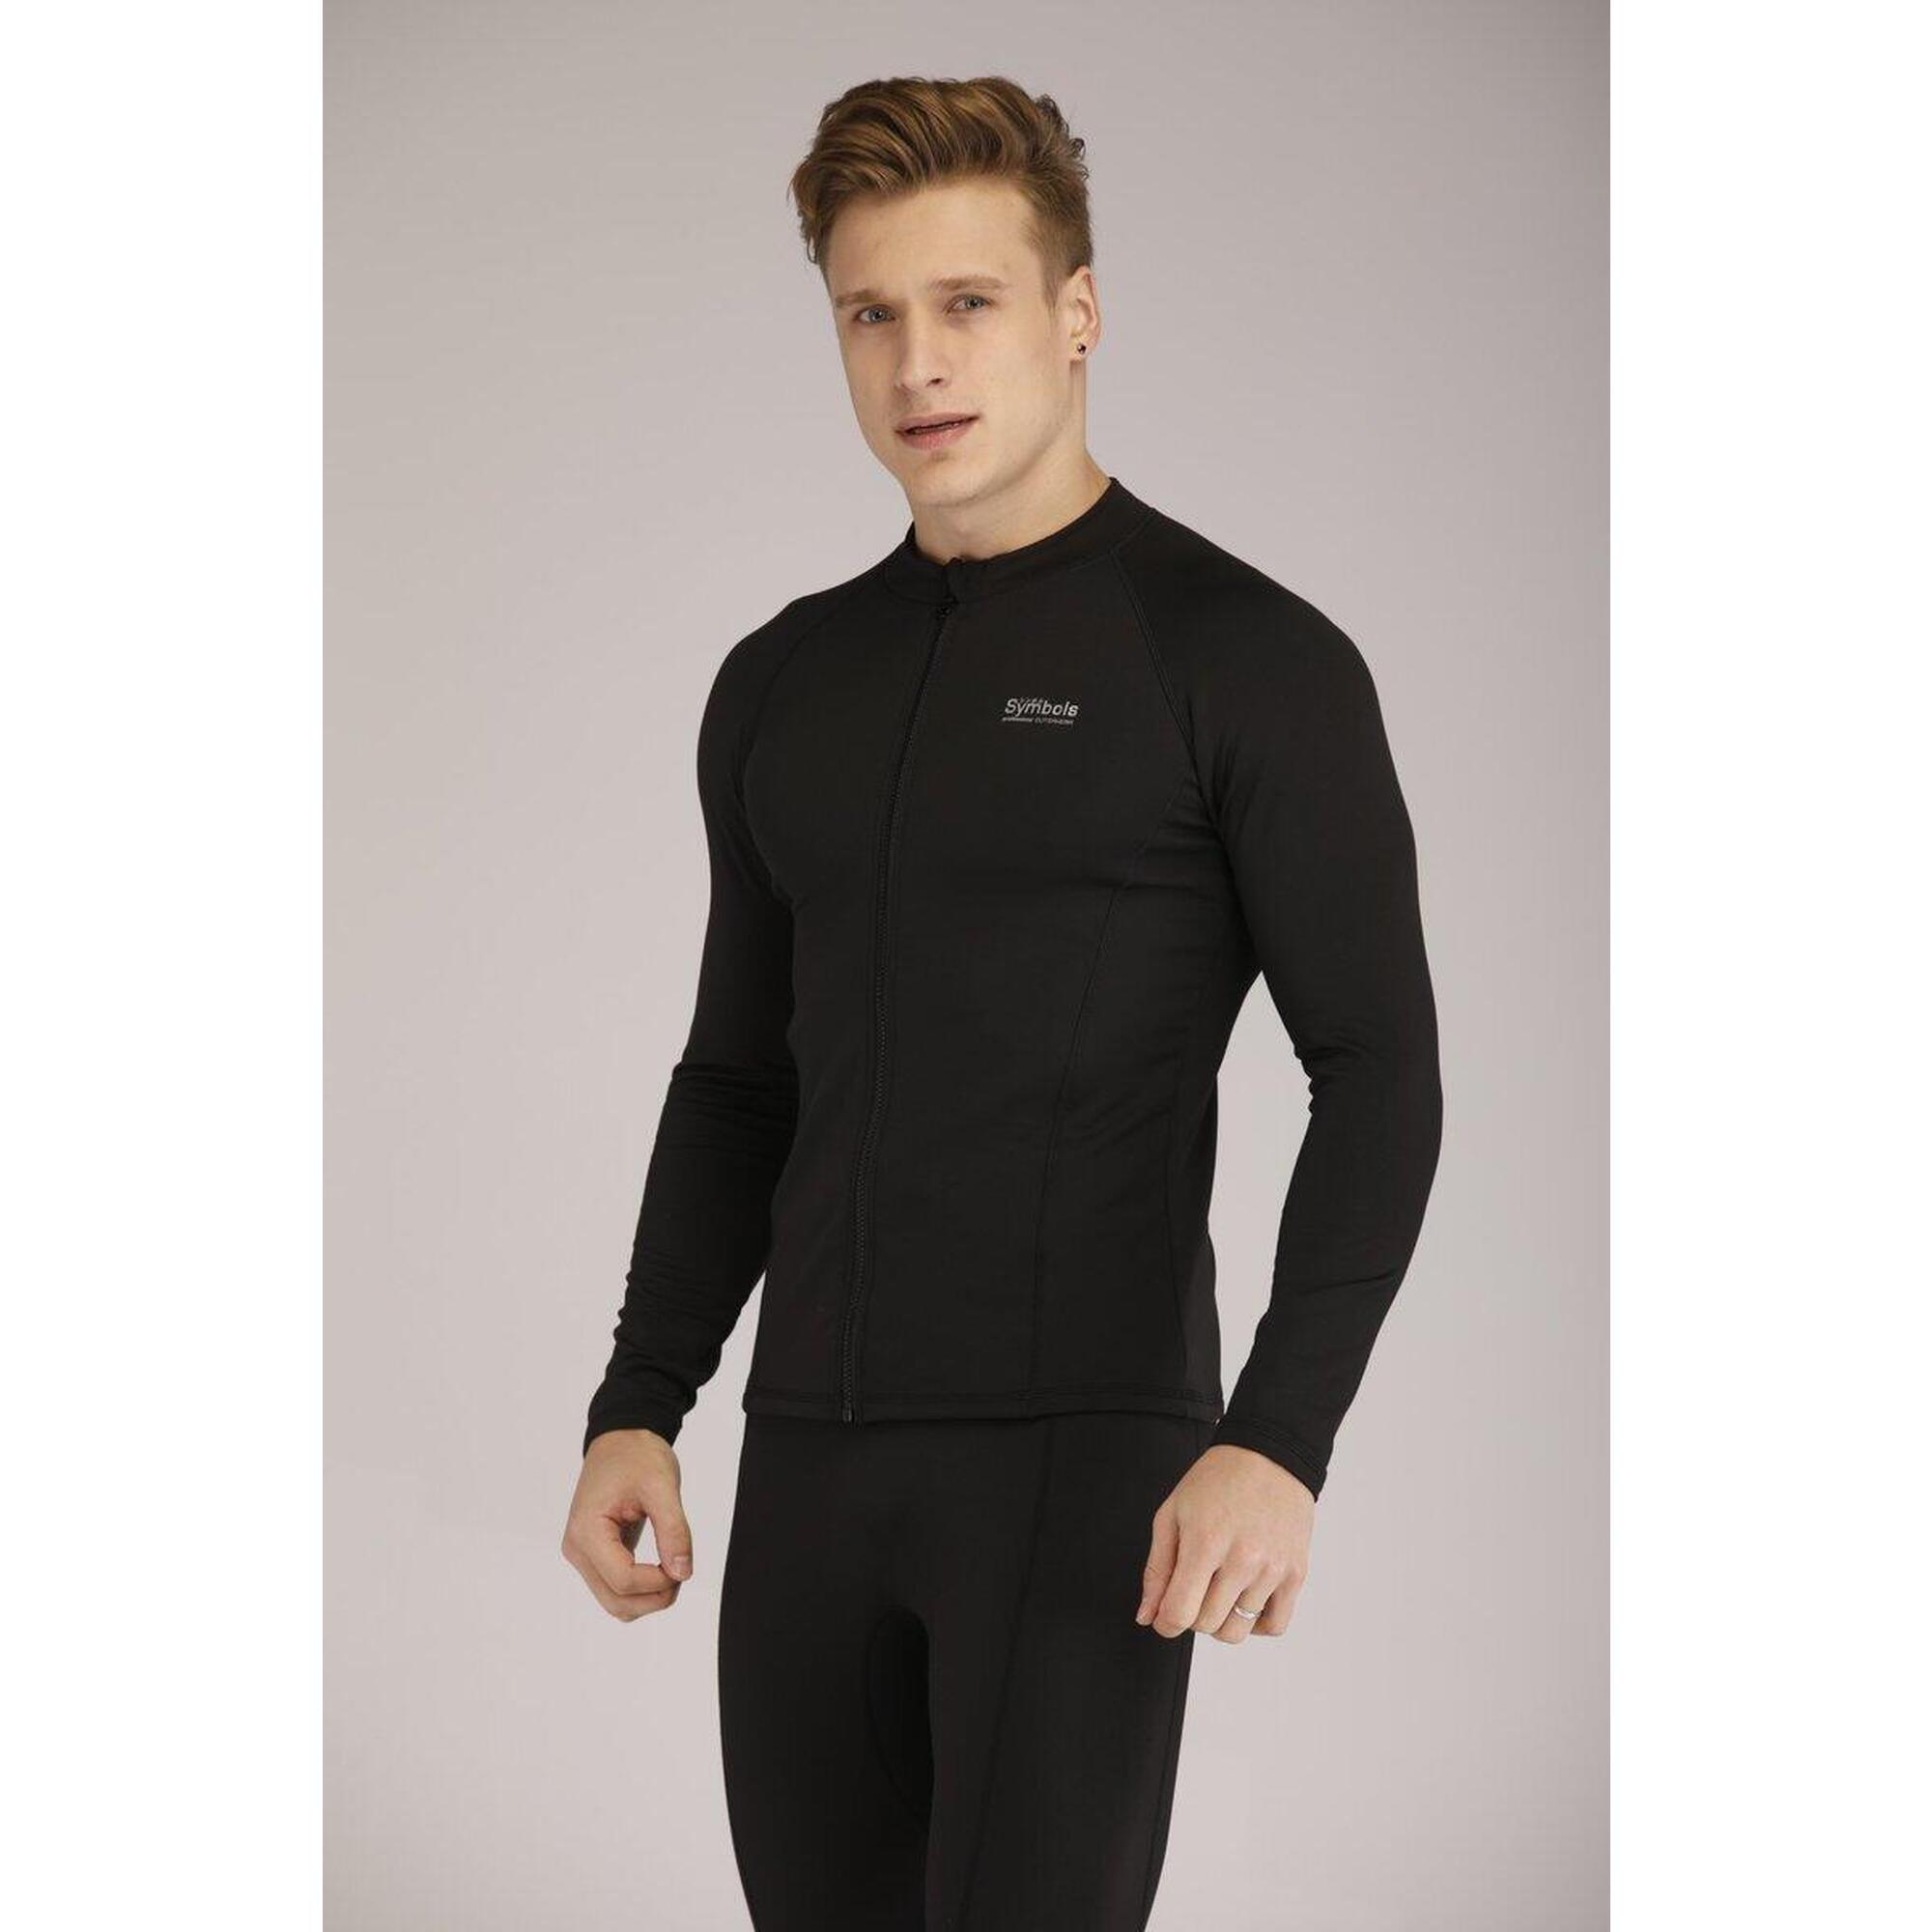 Adults 1.5mm Thick Thermal Fleece Top With Front Zipper - BLACK